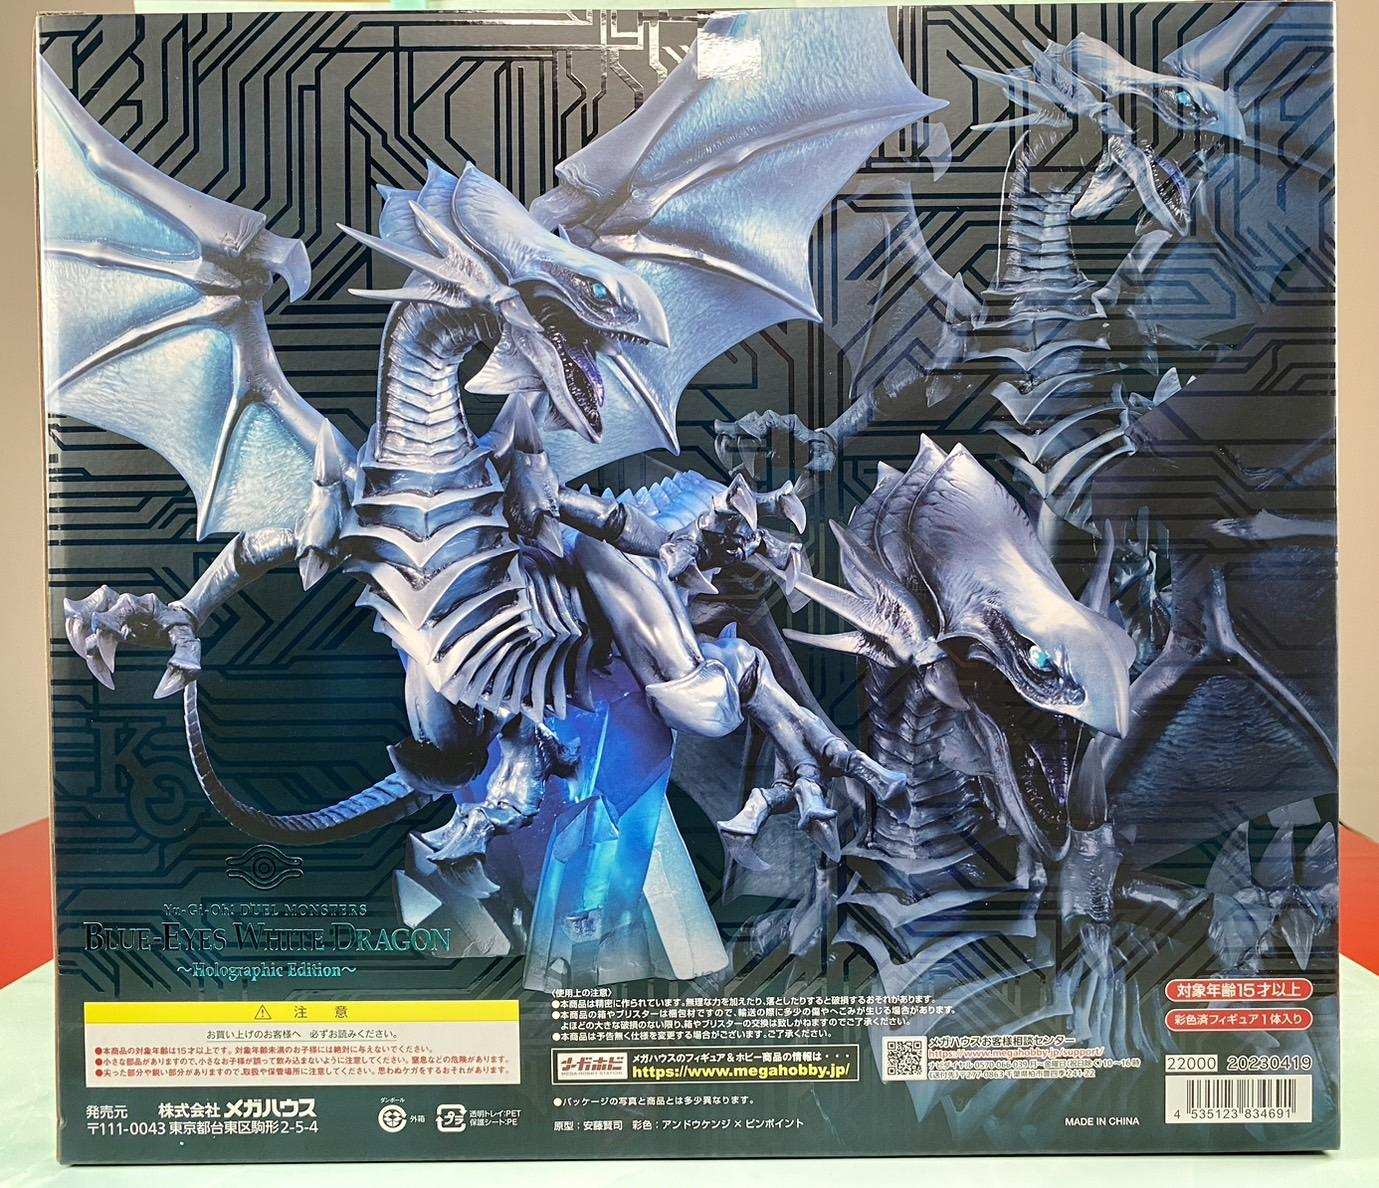 MegaHouse A.W.M《遊戲王》 青眼白龍～Holographic Edition～－開箱